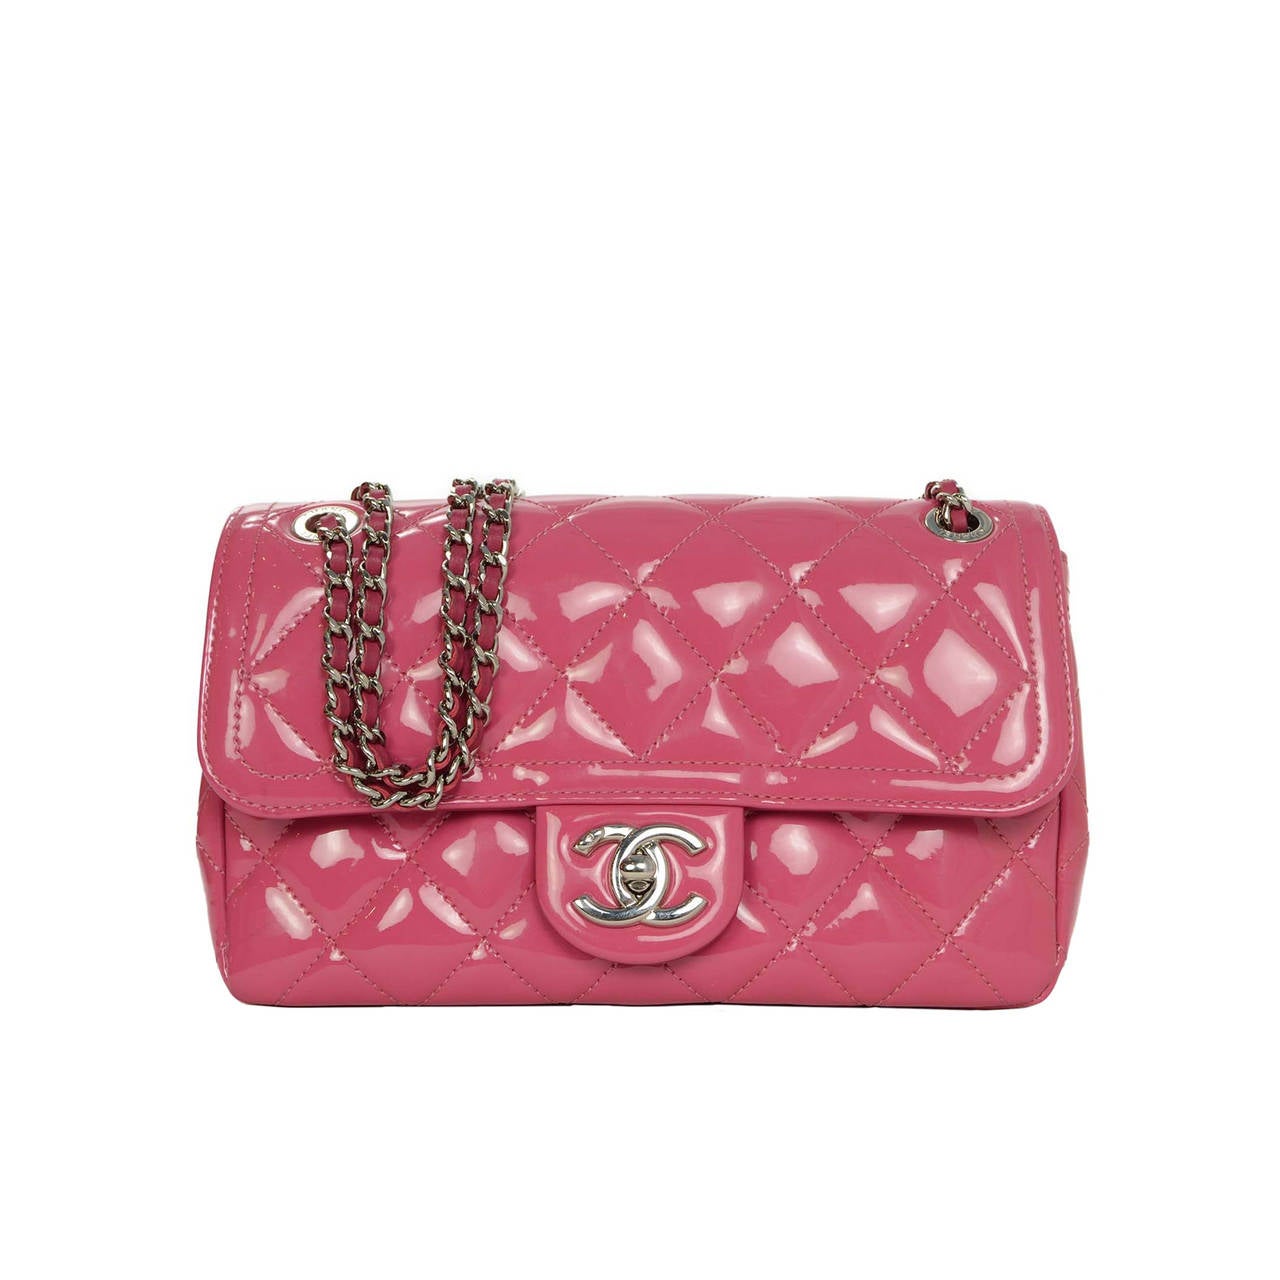 CHANEL '15 Pink Quilted Patent Small Flap Bag SHW